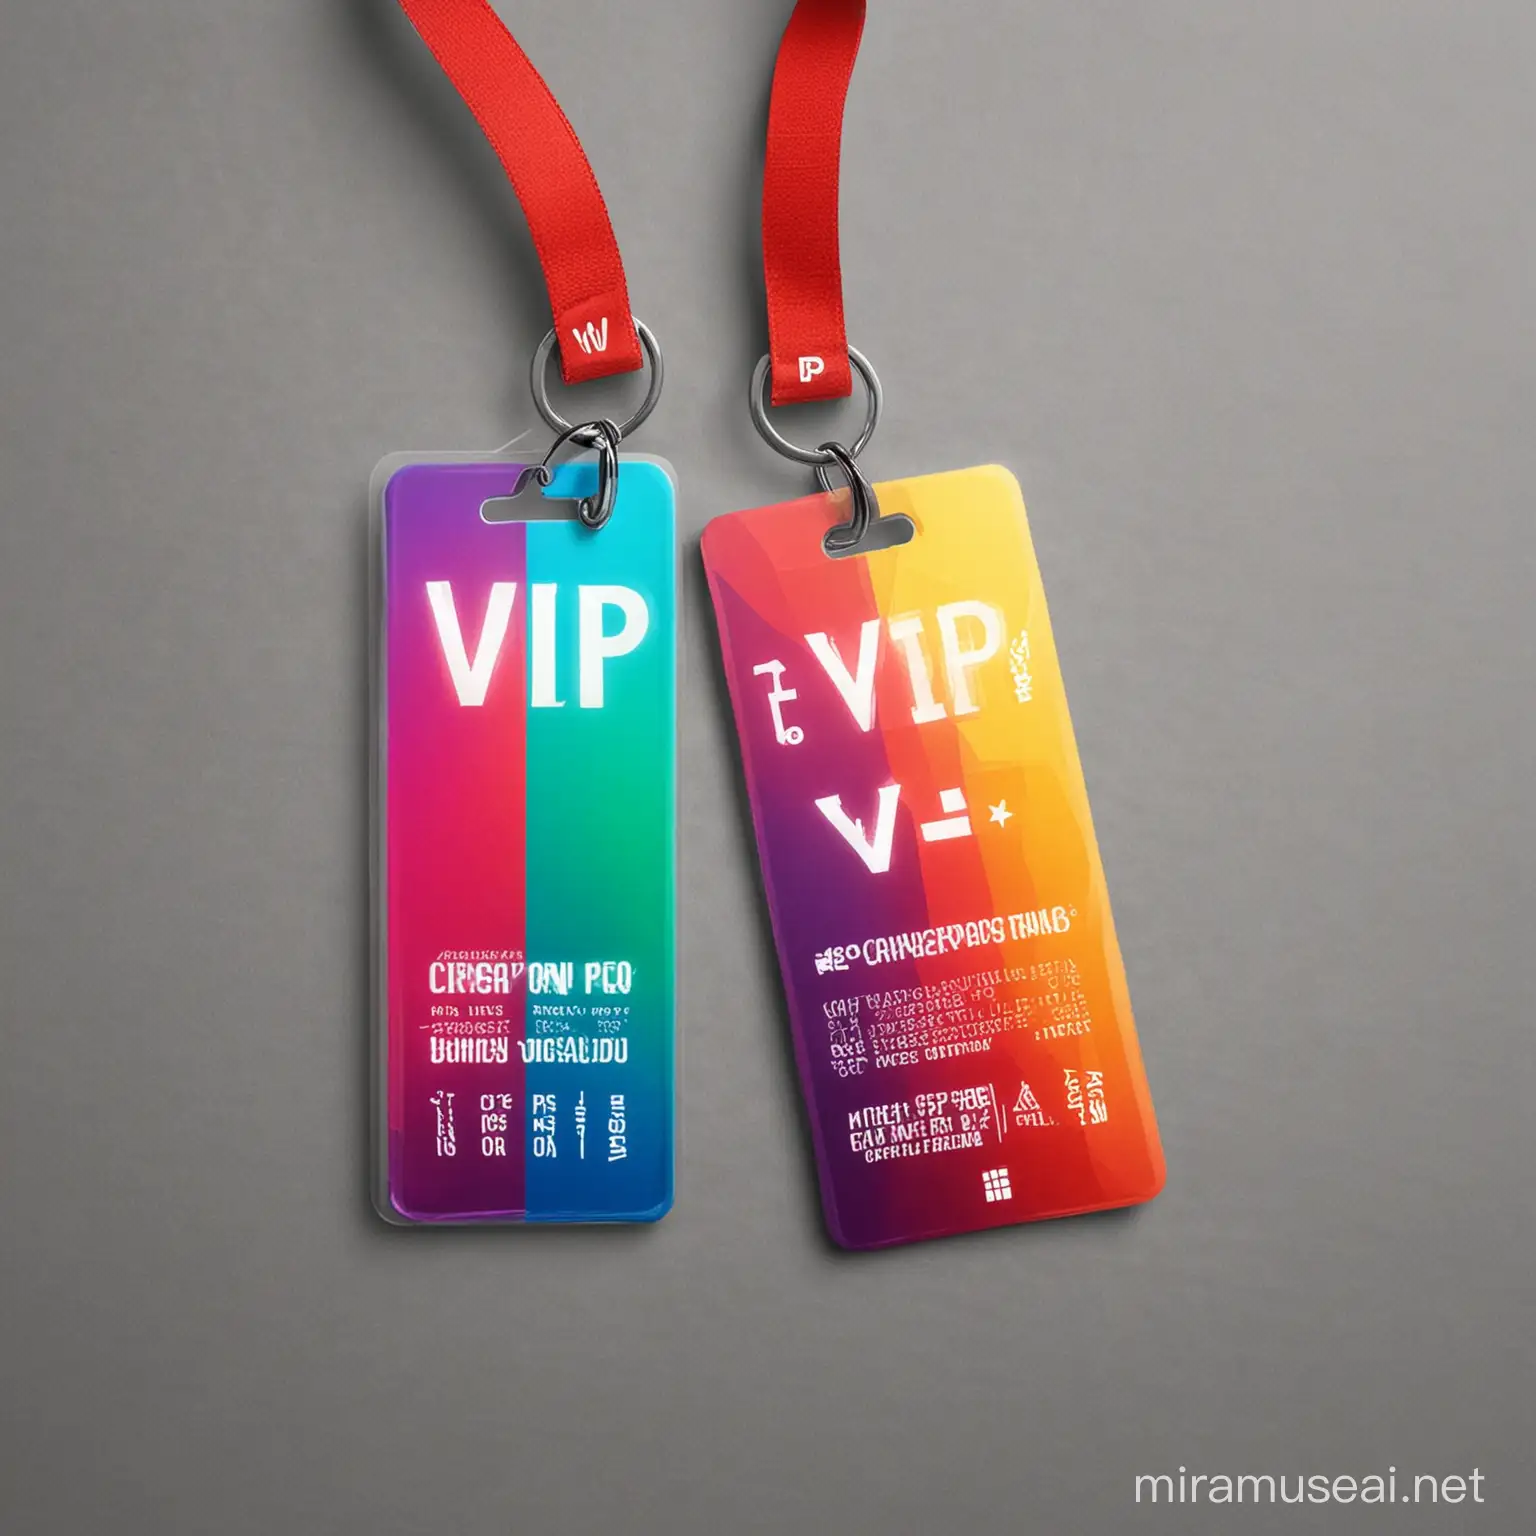 VIP Pass ID design colorful, the "VIP" is emphasize